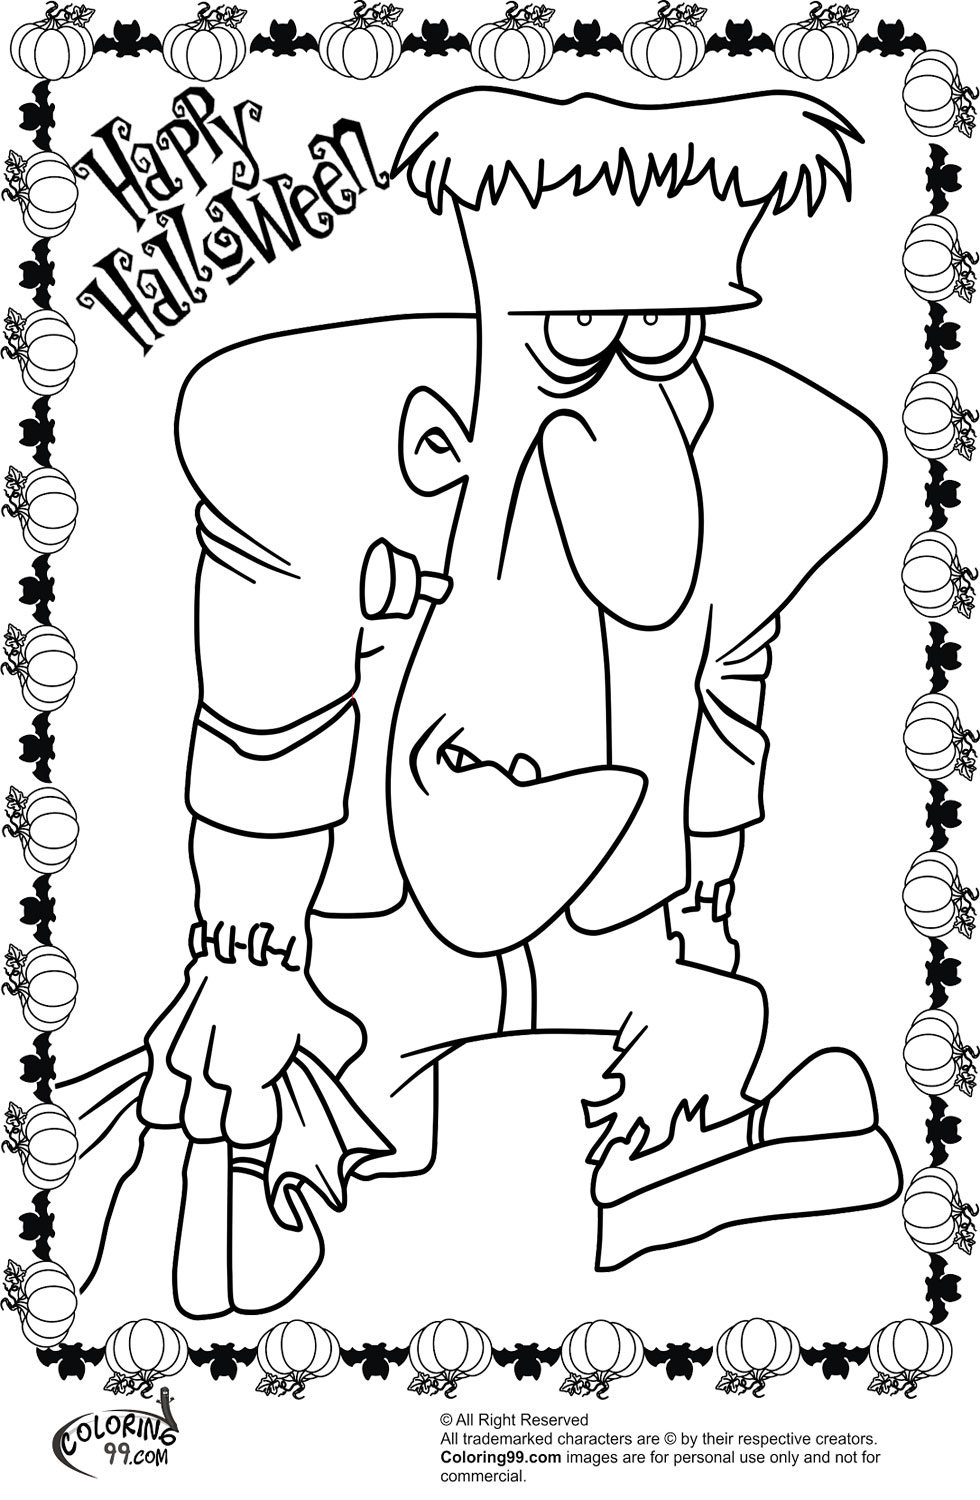 Frankenstein Halloween Coloring Pages | Team colors